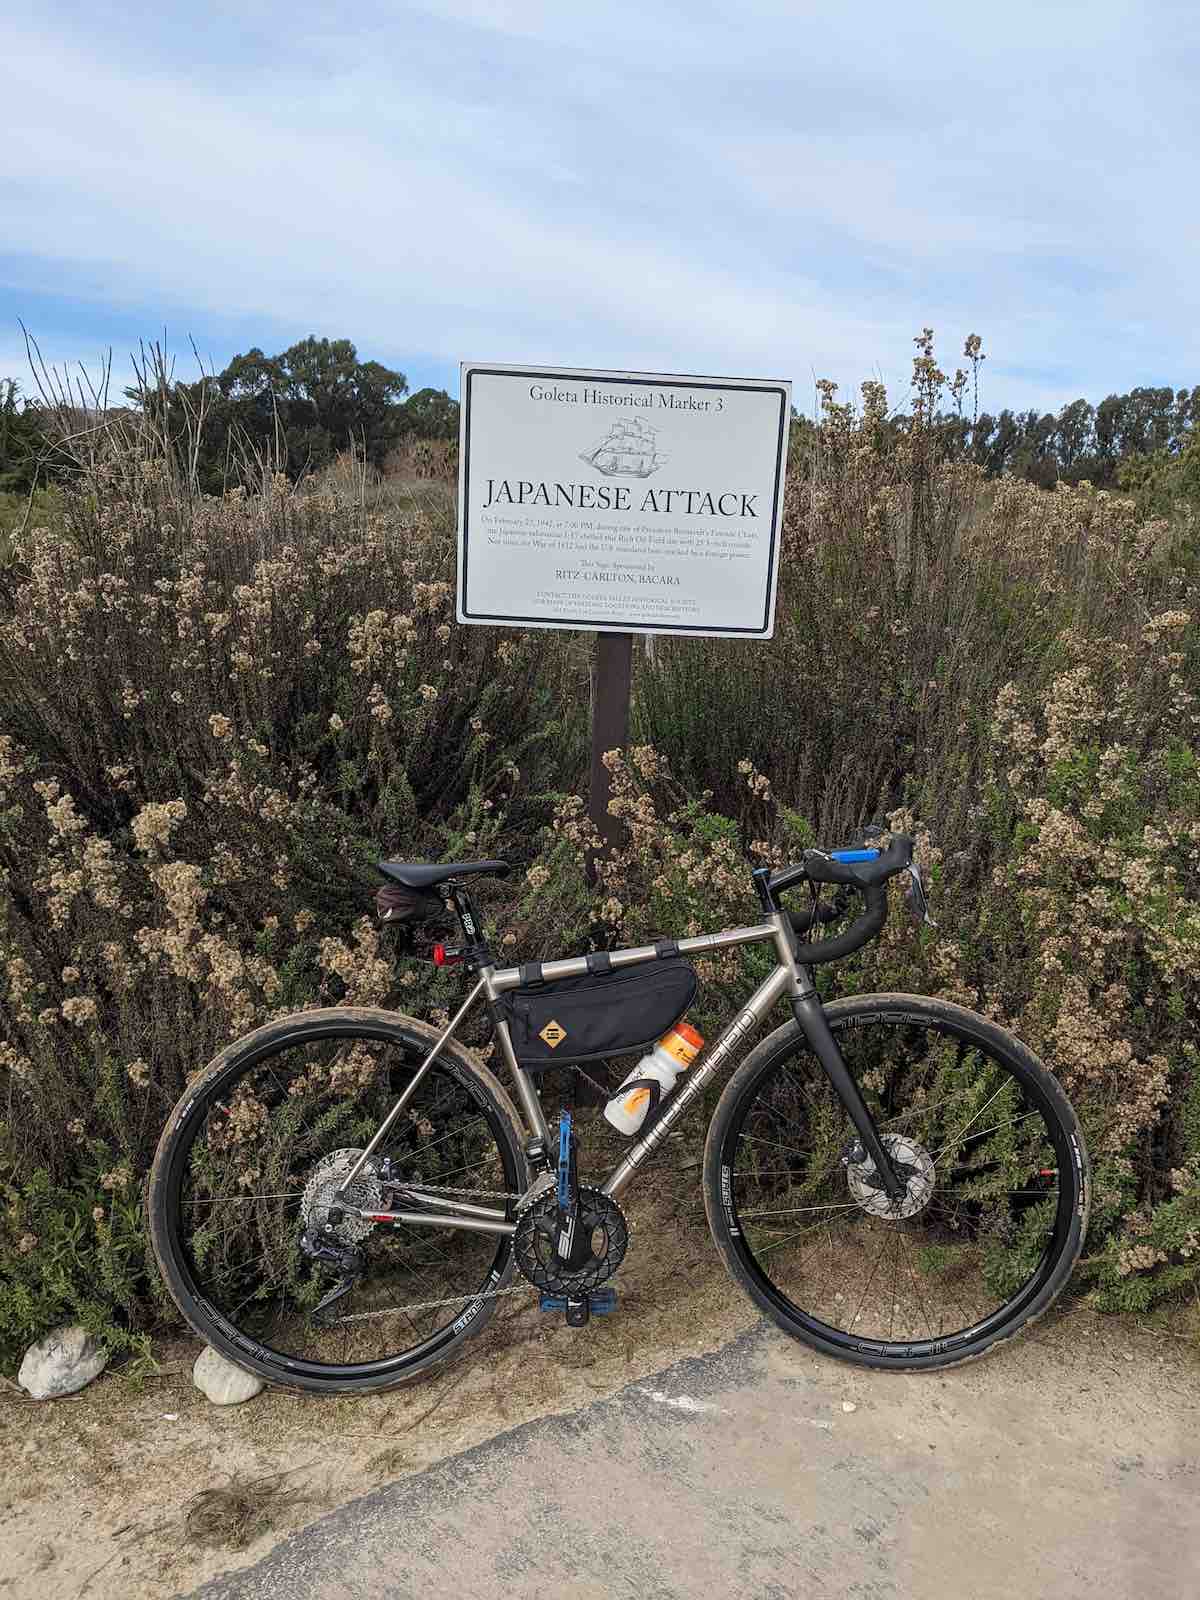 bikerumor pic of the day a litespeed bicycle leans against a sign that is a historical marker describing the japanese attack on us soil of an oil field in Ellwood california.